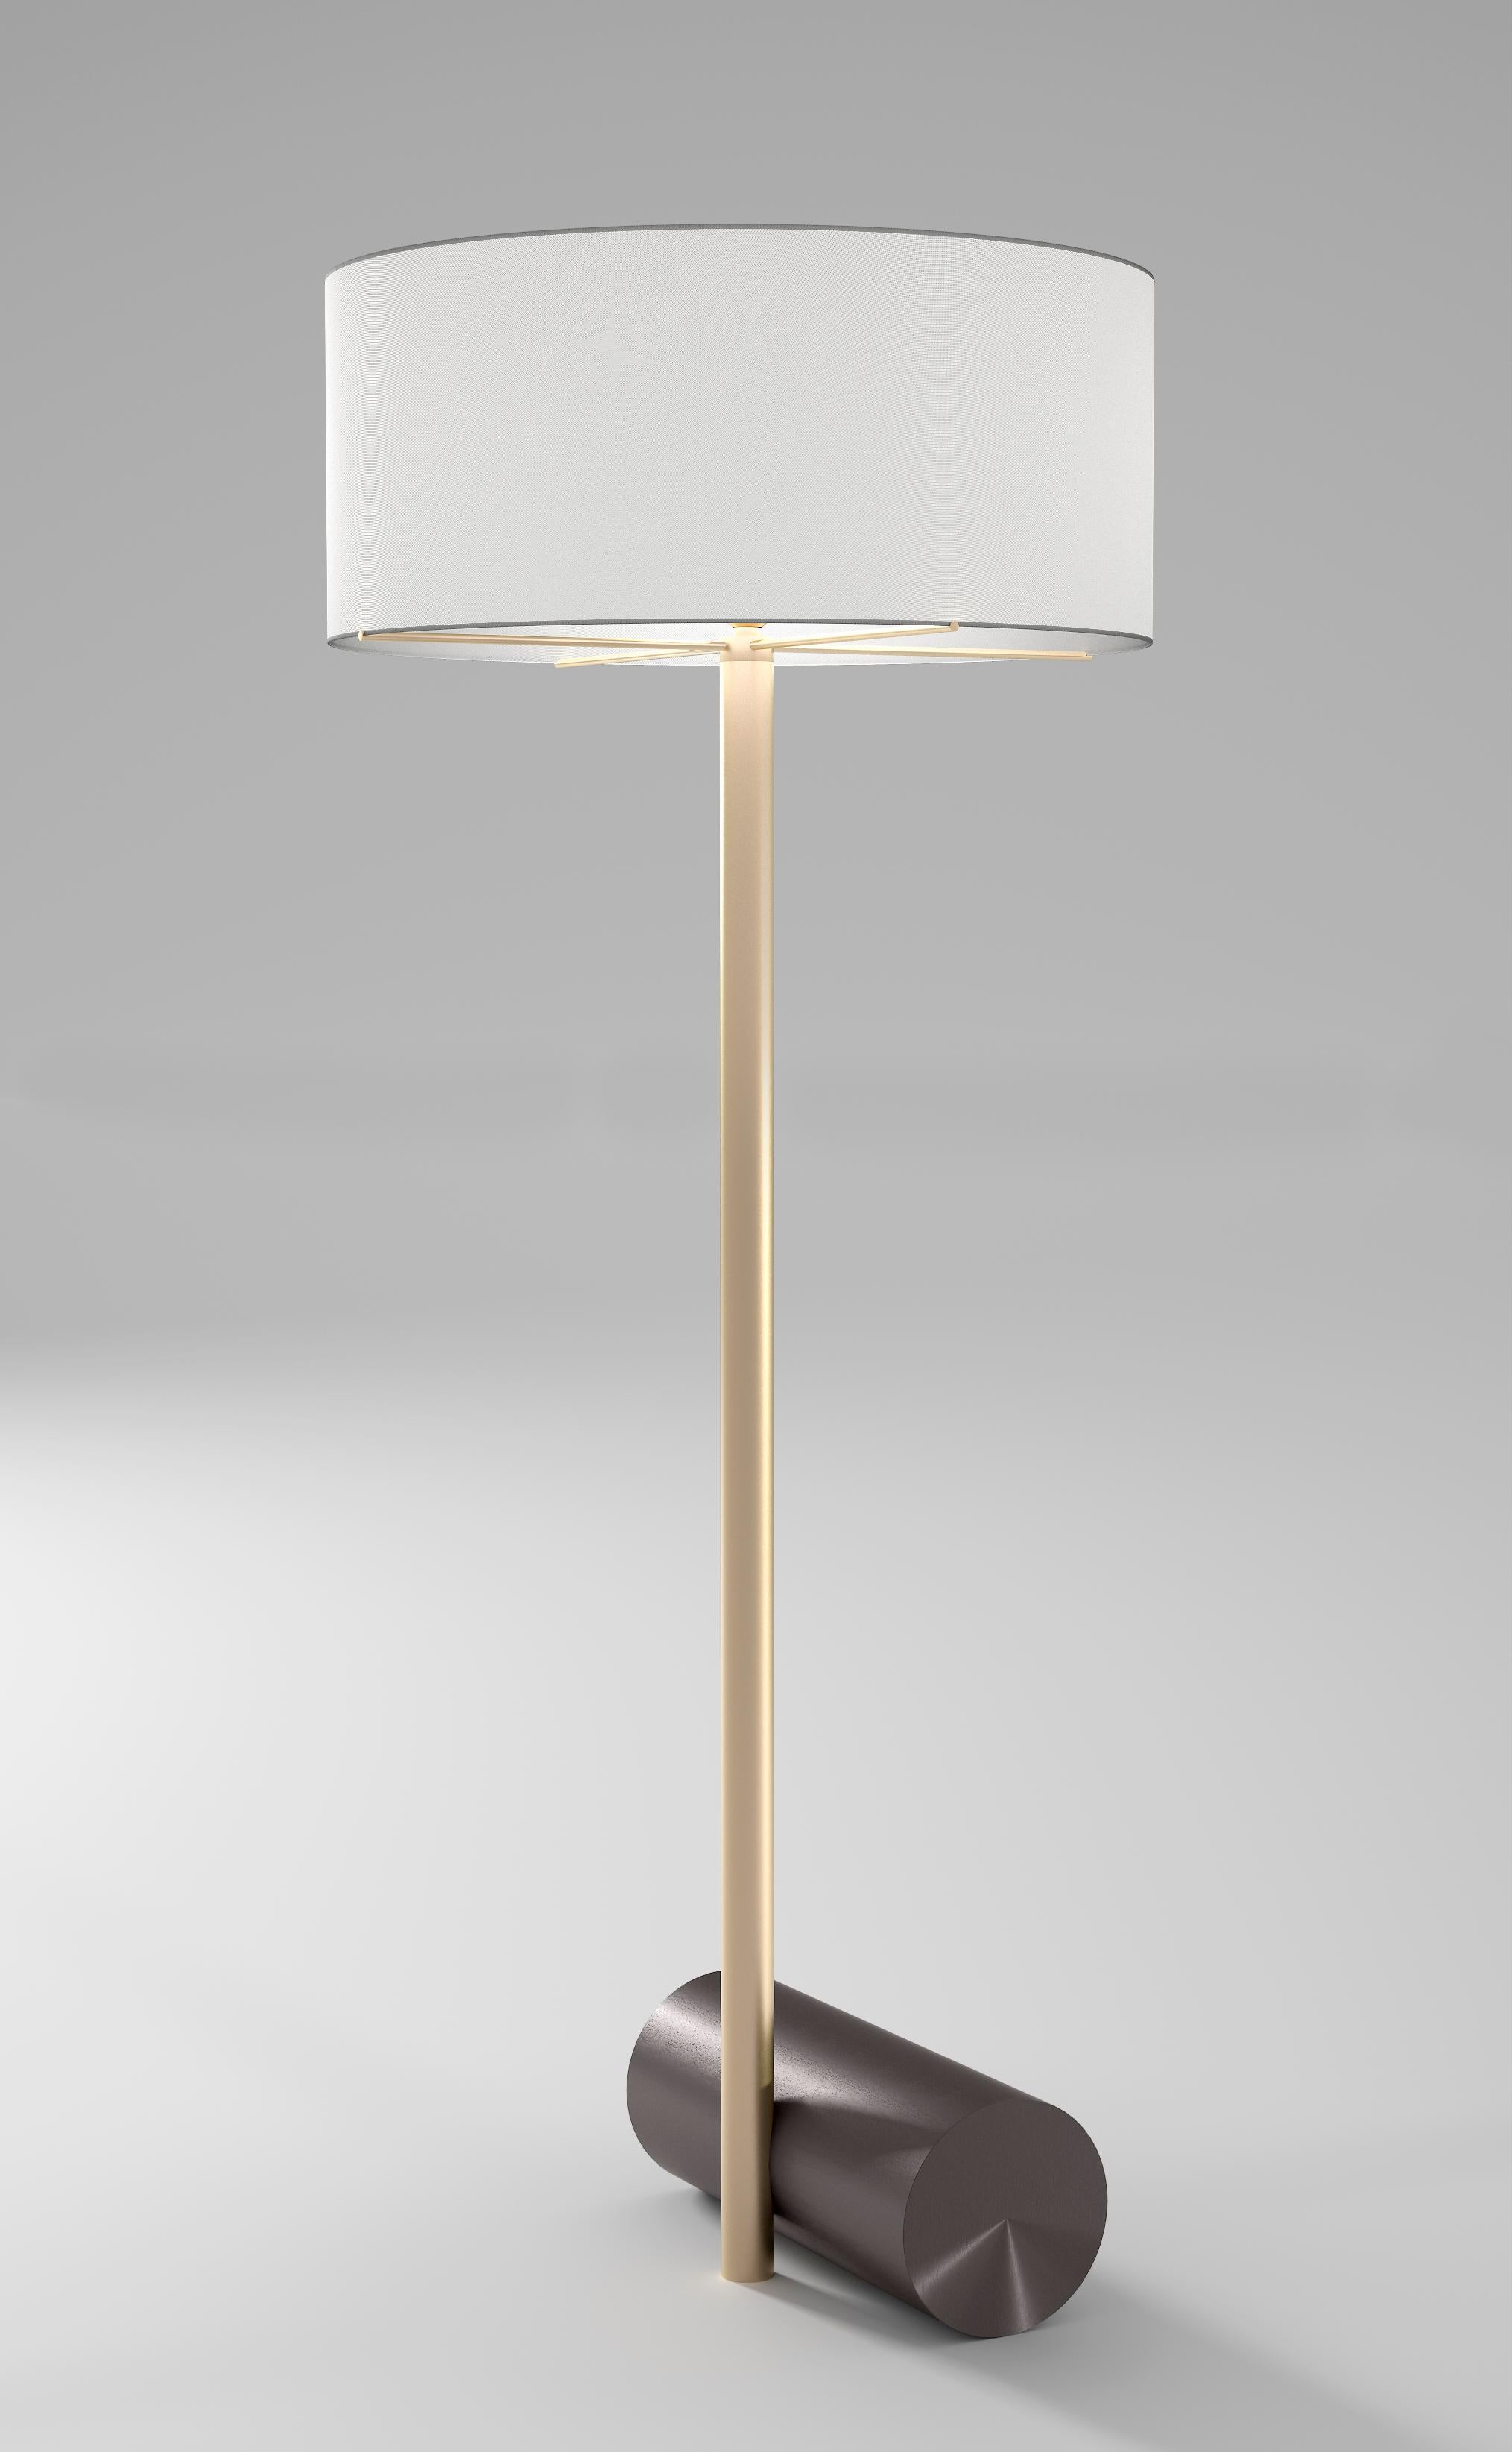 Calee XL floor lamp by Pool
Dimensions: D70 X H170 cm
Materials: Solid Brass, Polycarbonate, Textile cable (2m).
Others finishes and dimensions are available.

All our lamps can be wired according to each country. If sold to the USA it will be